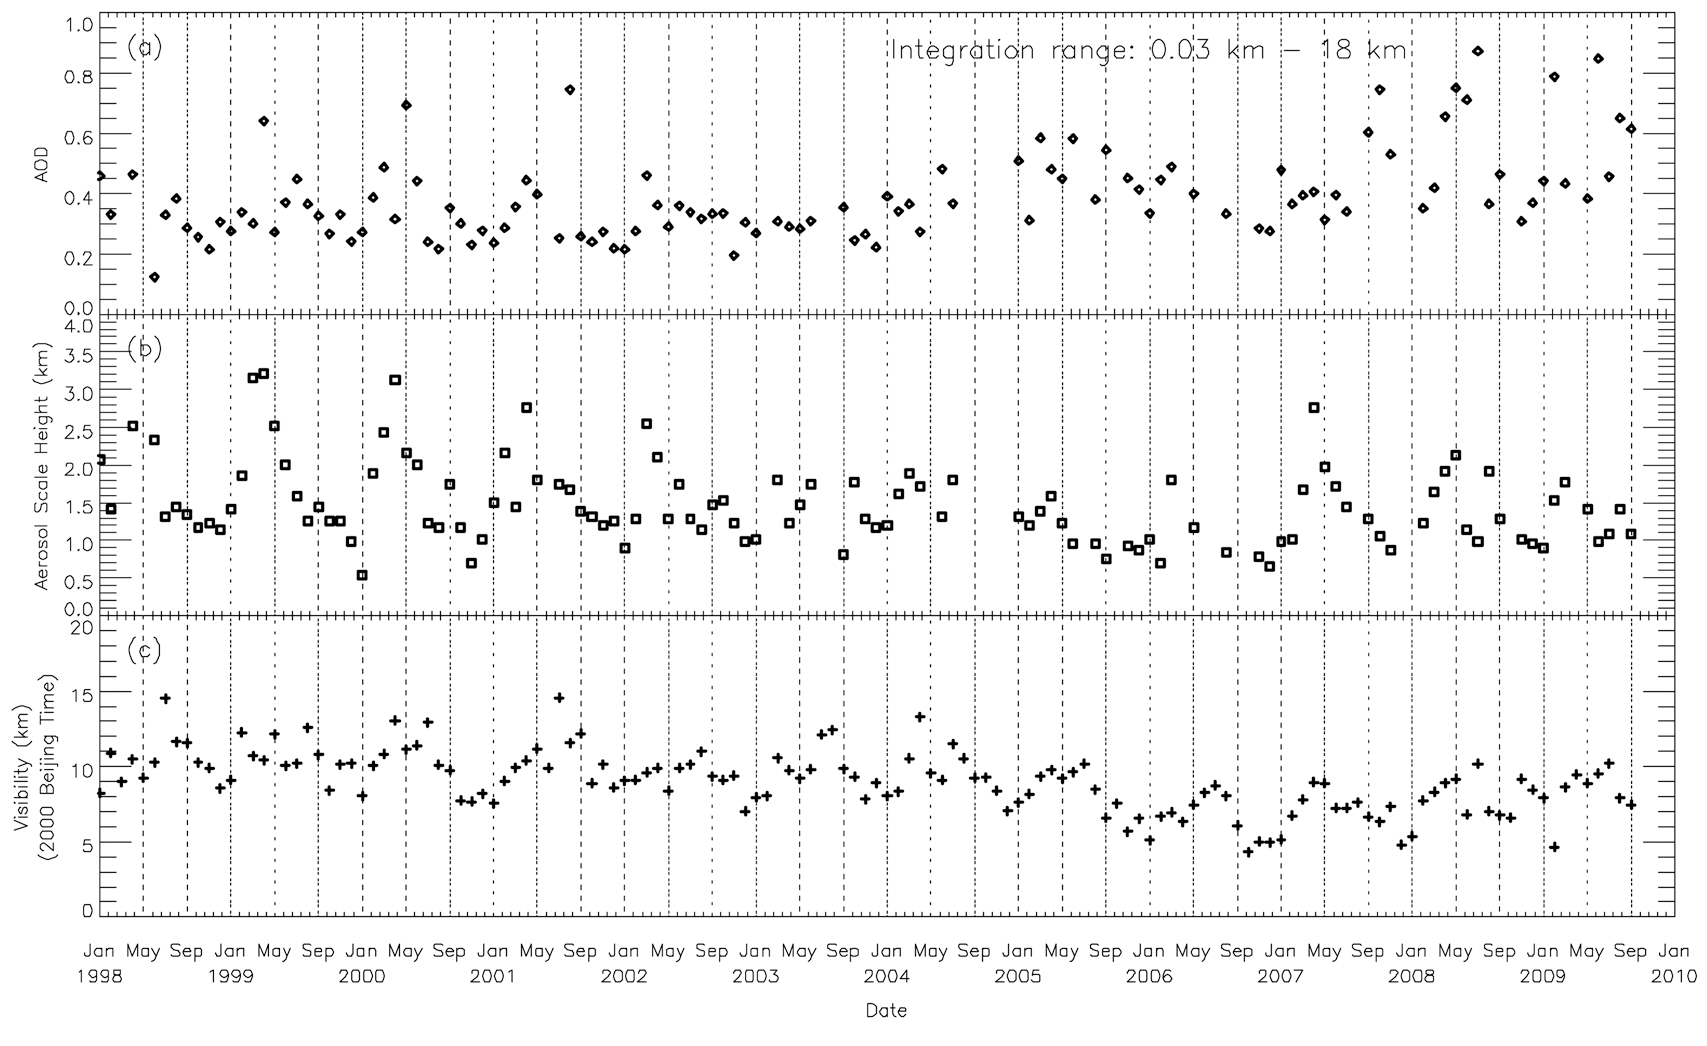 Temporal variation of (a) tropospheric aerosol optical depth at 532 nm measured by LIDAR (b) aerosol scale height measuredby LIDAR and (c) surface visibility from Anhui Meteorological Bureau from January 1998 to September 2009.